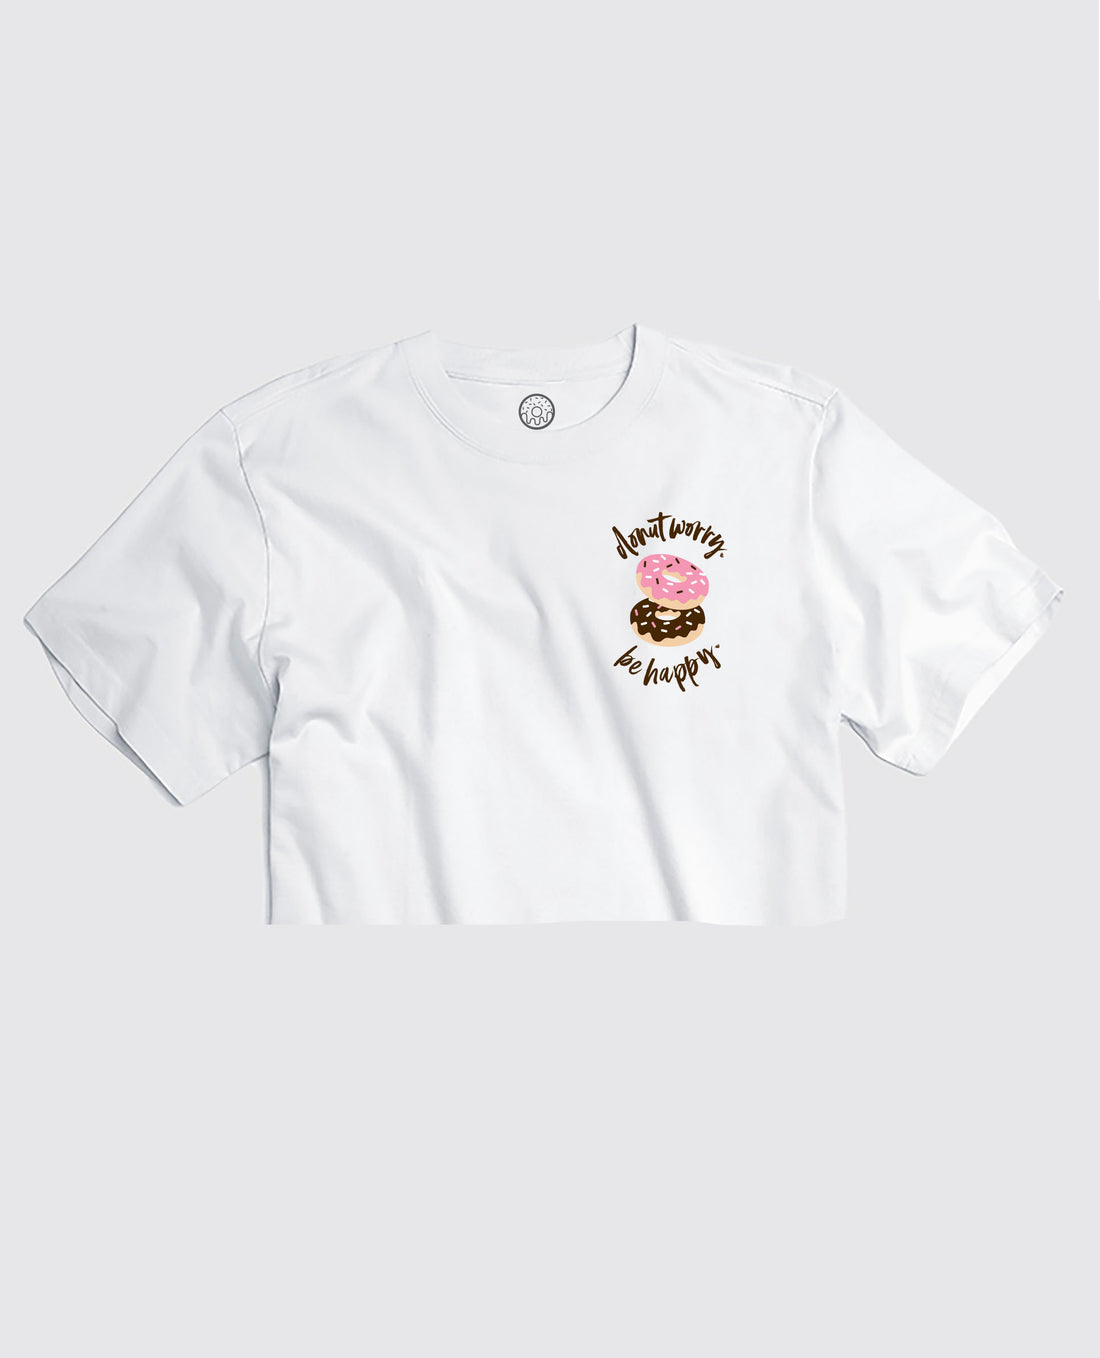 Donut Worry. Be Happy. White Cropped Tee